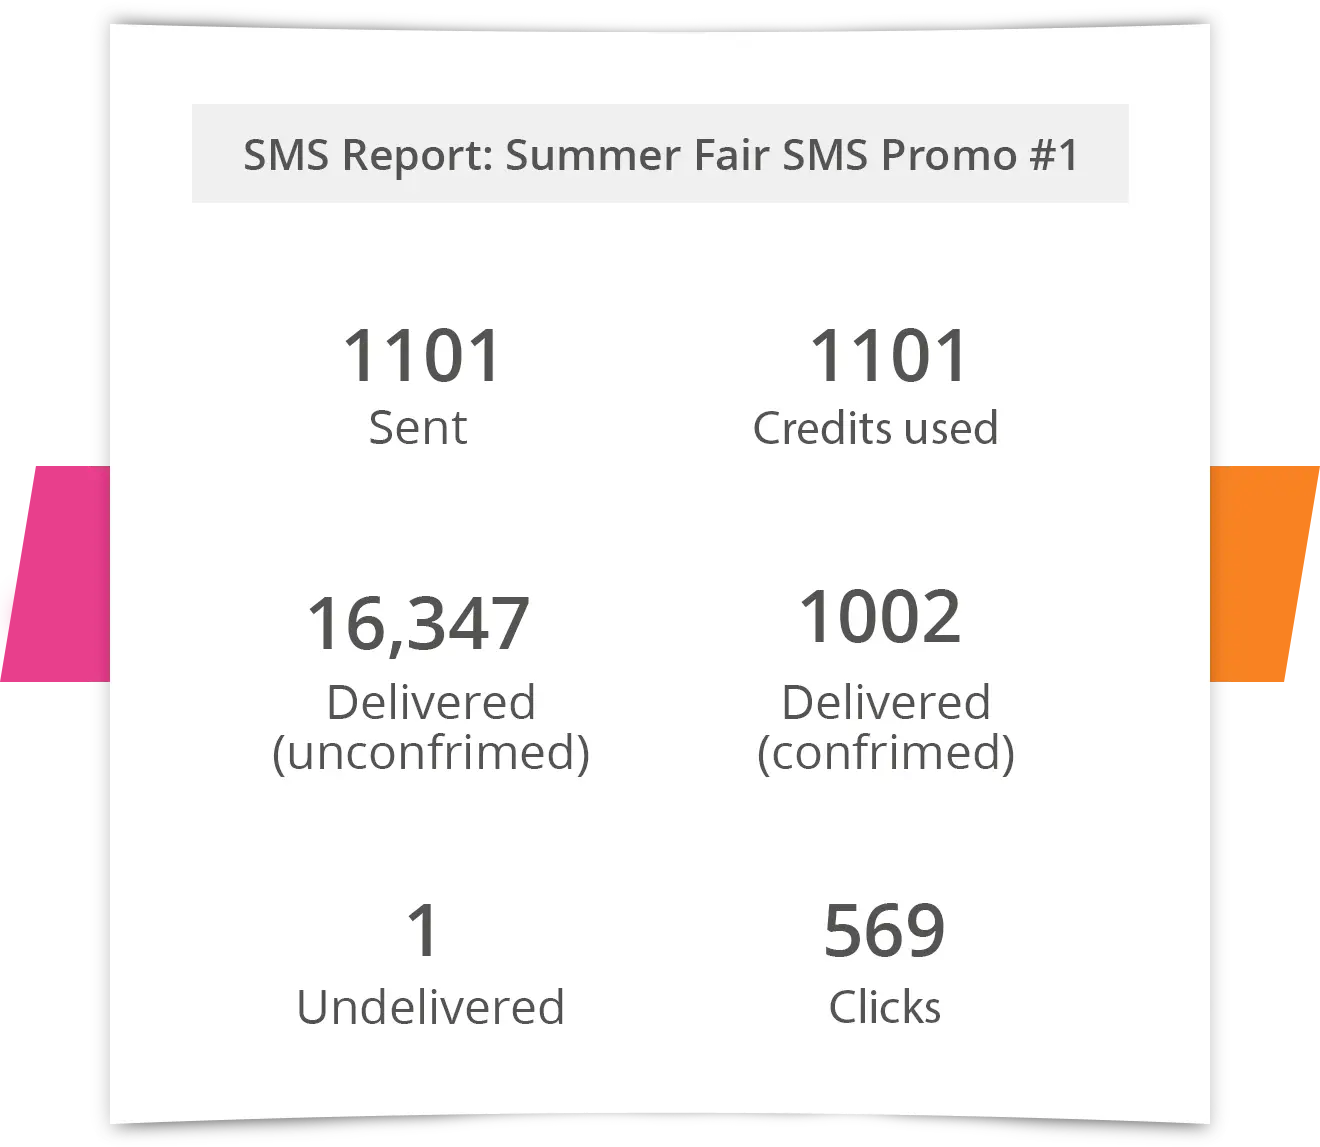 SMS reports